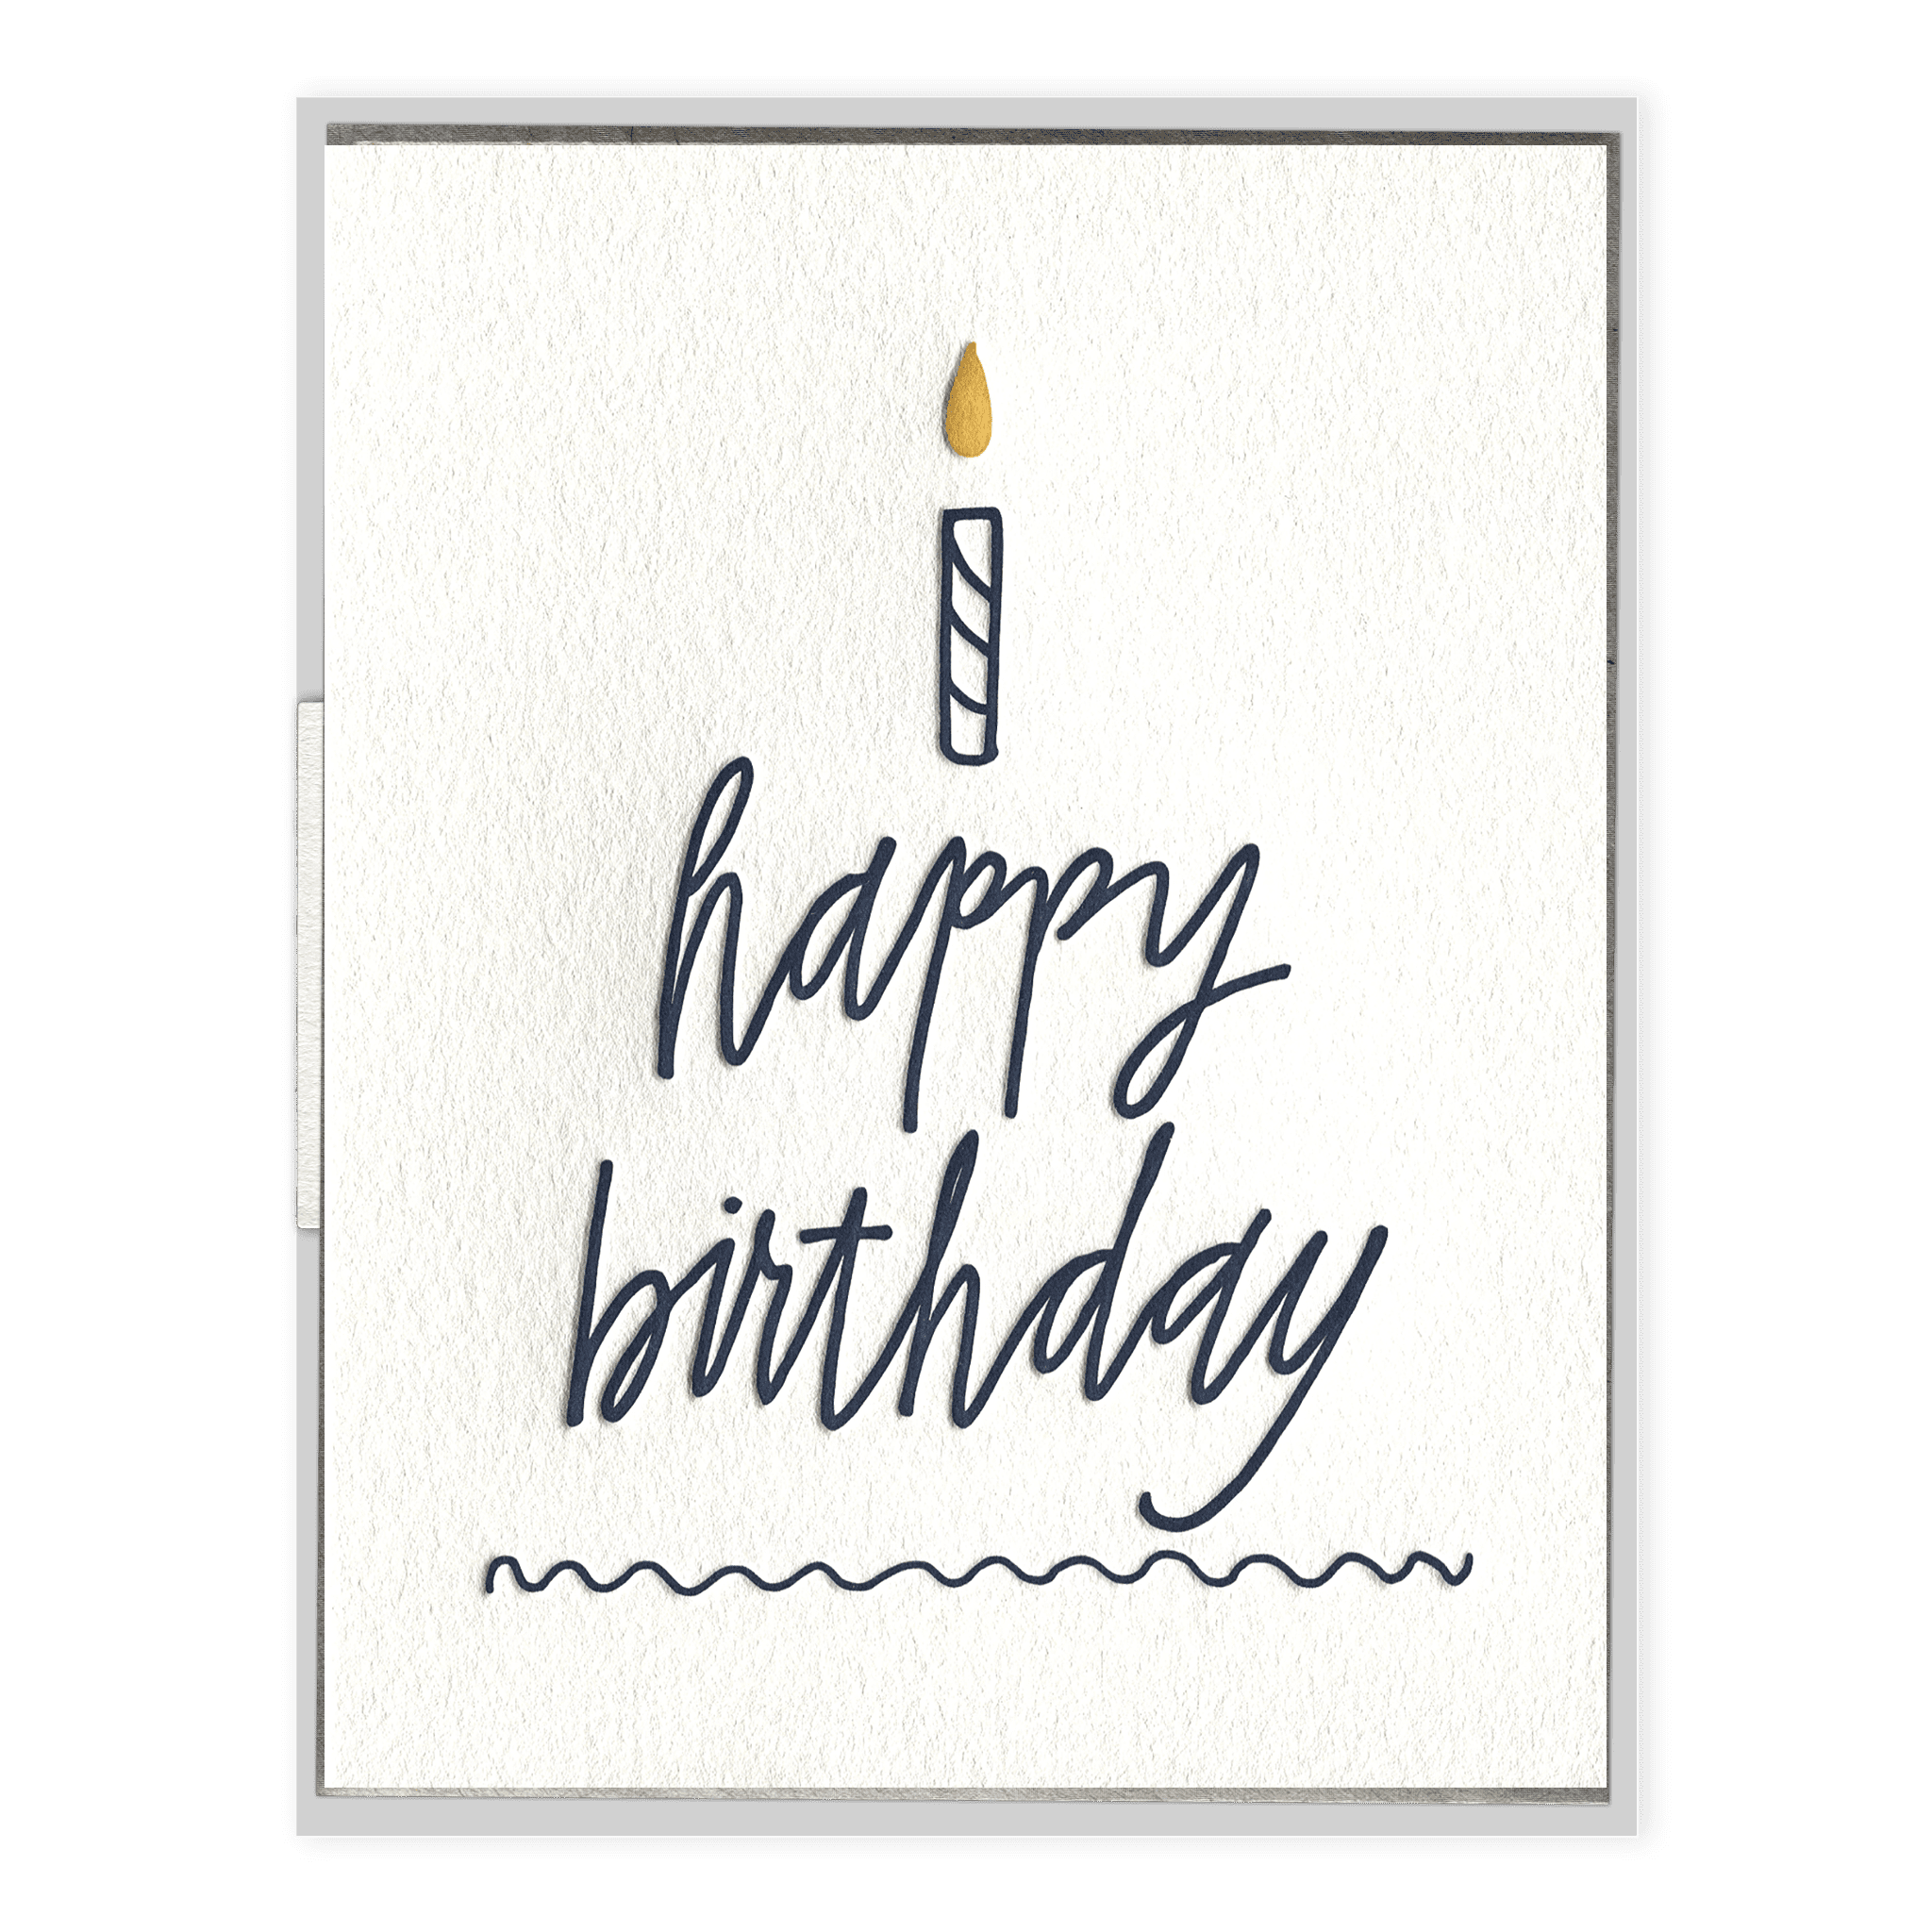 Happy Birthday Text Lettering Calligraphy Isolated On White Background